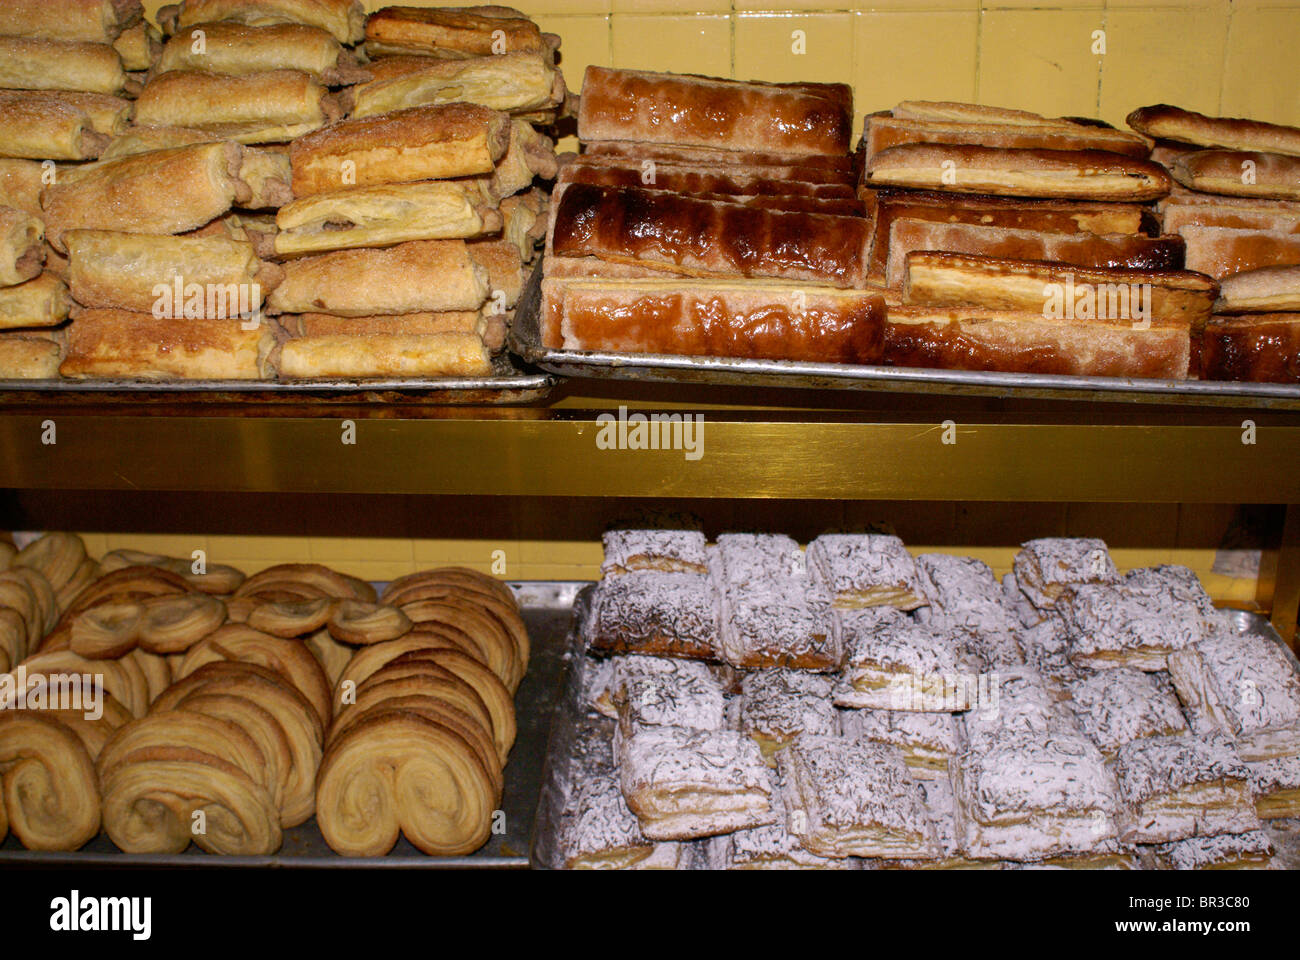 Mexican baked goods in a panaderia or bakery in Puebla, Mexico. Stock Photo